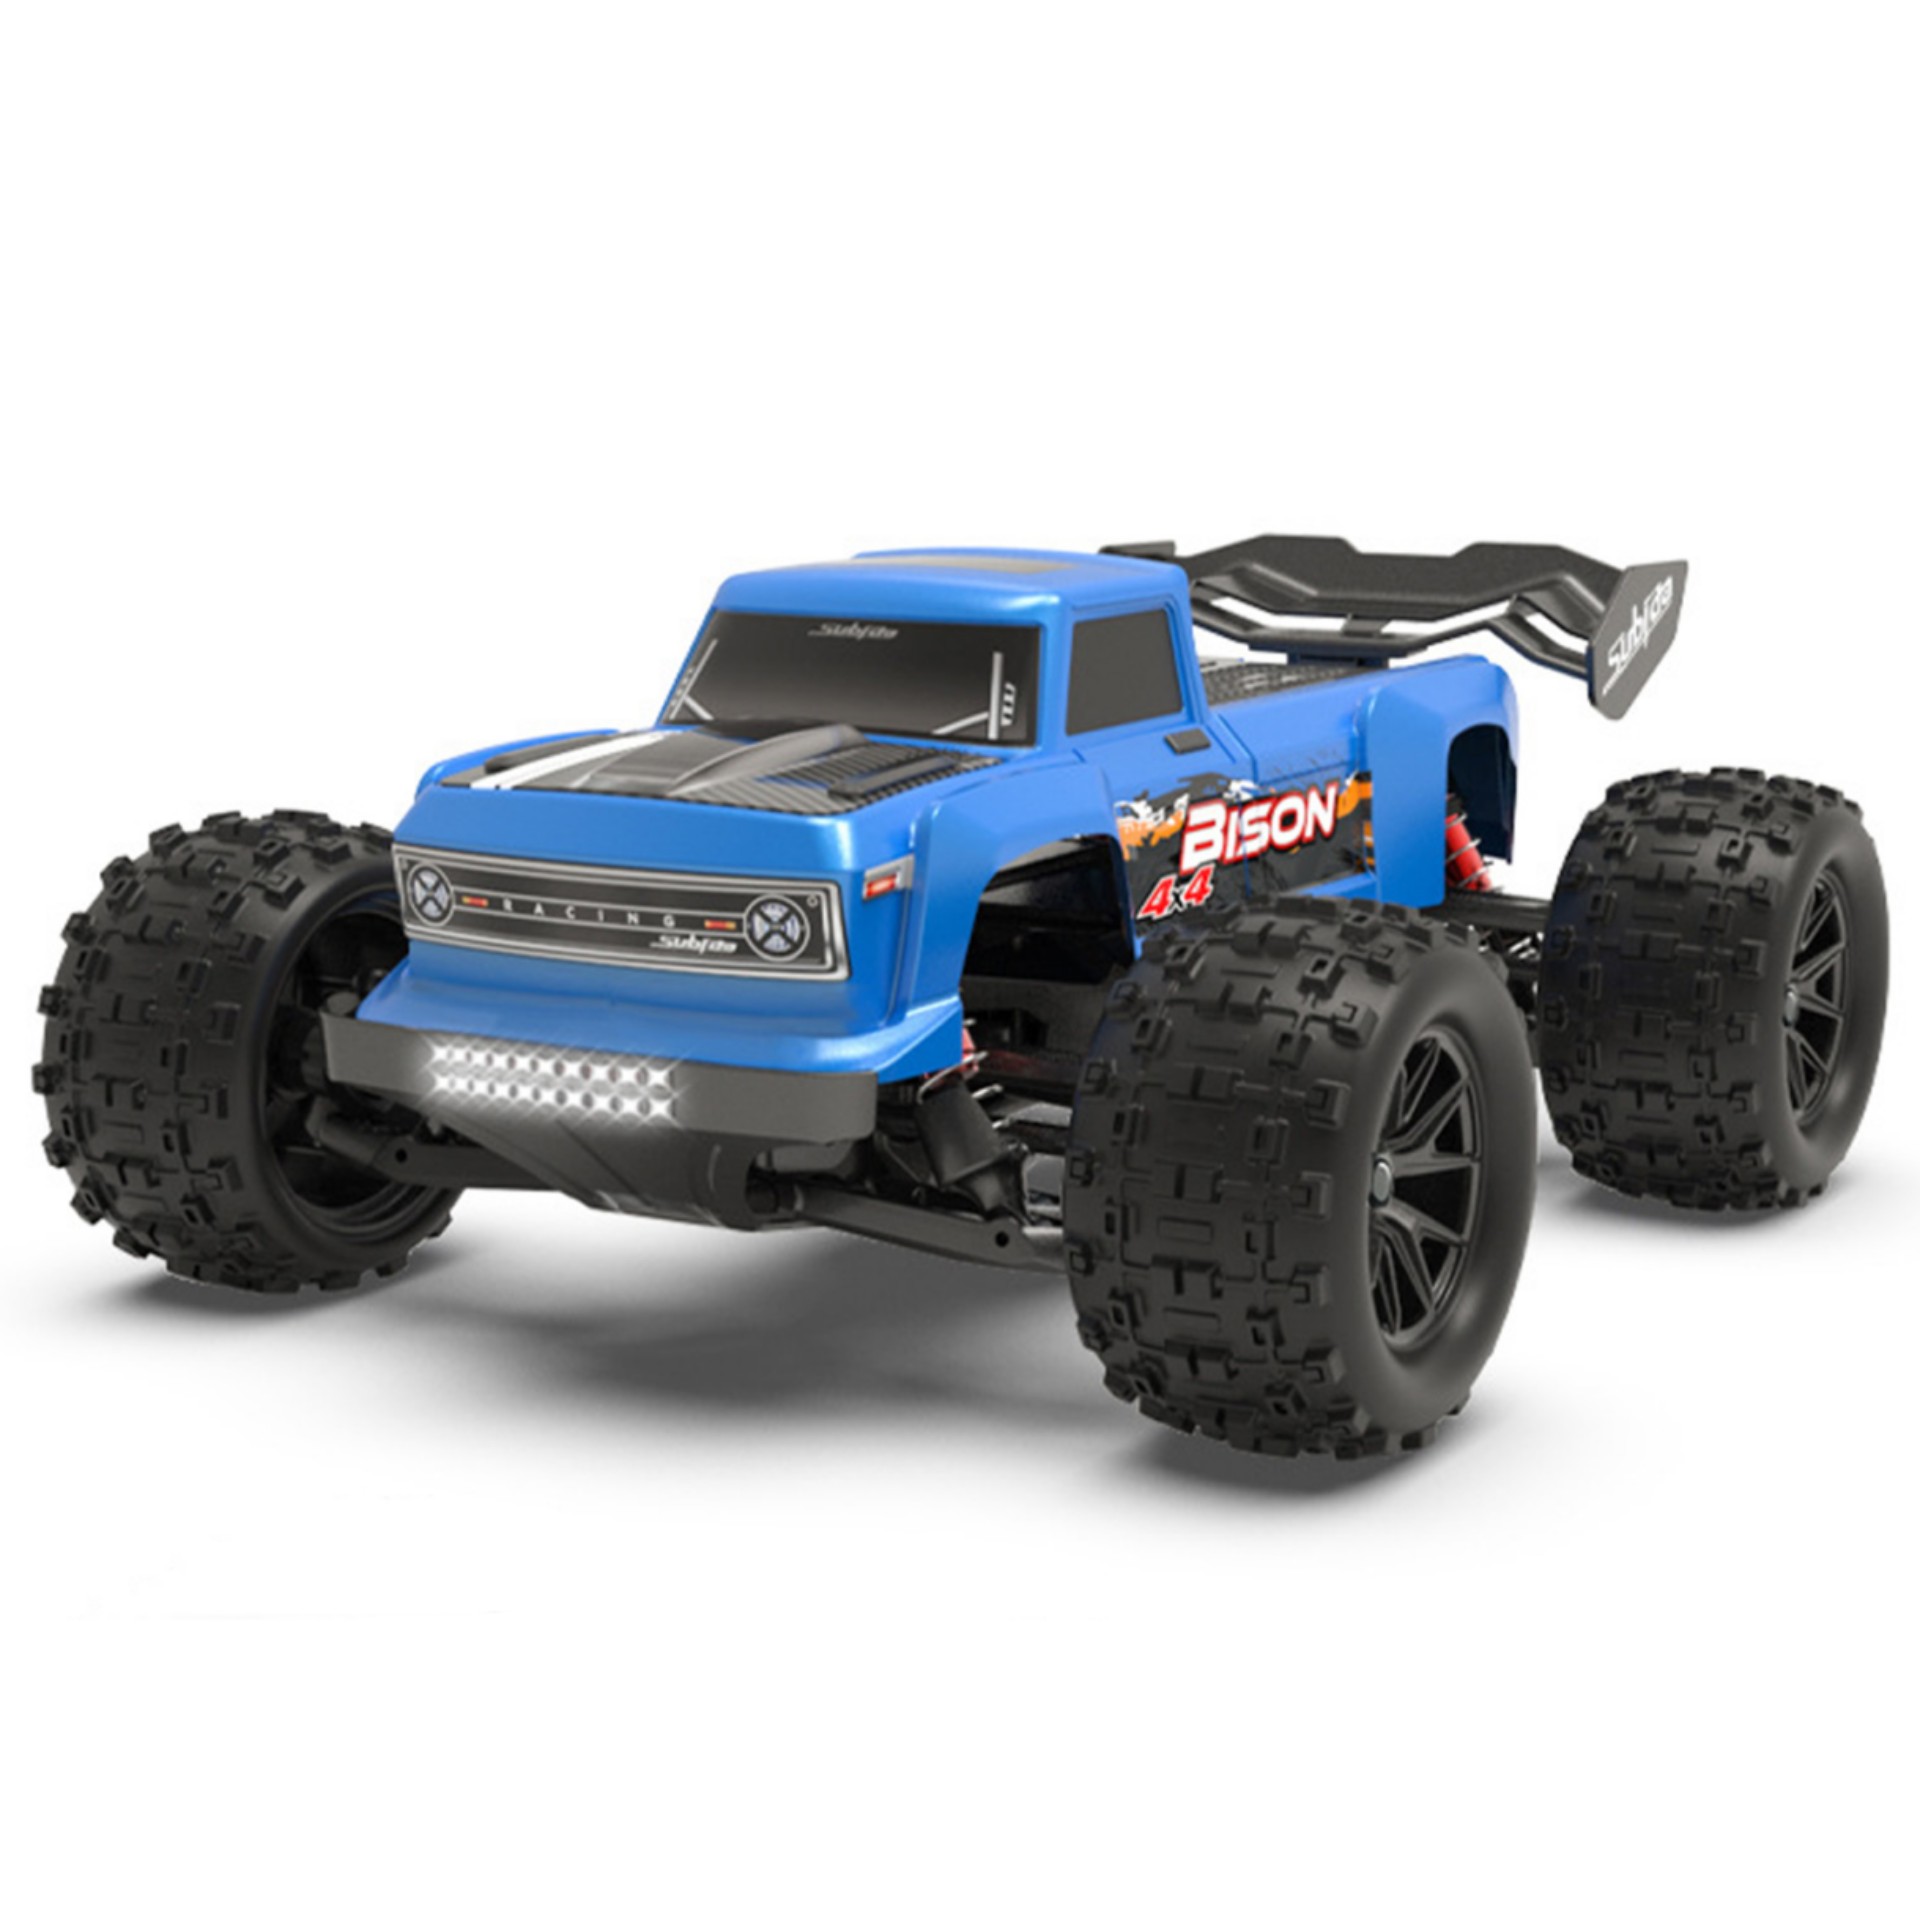 1:16 RC Car 2.4G Electric Off-Road Racing Vehicle 50KM/H High Speed Drift Car Red 2 Batteries